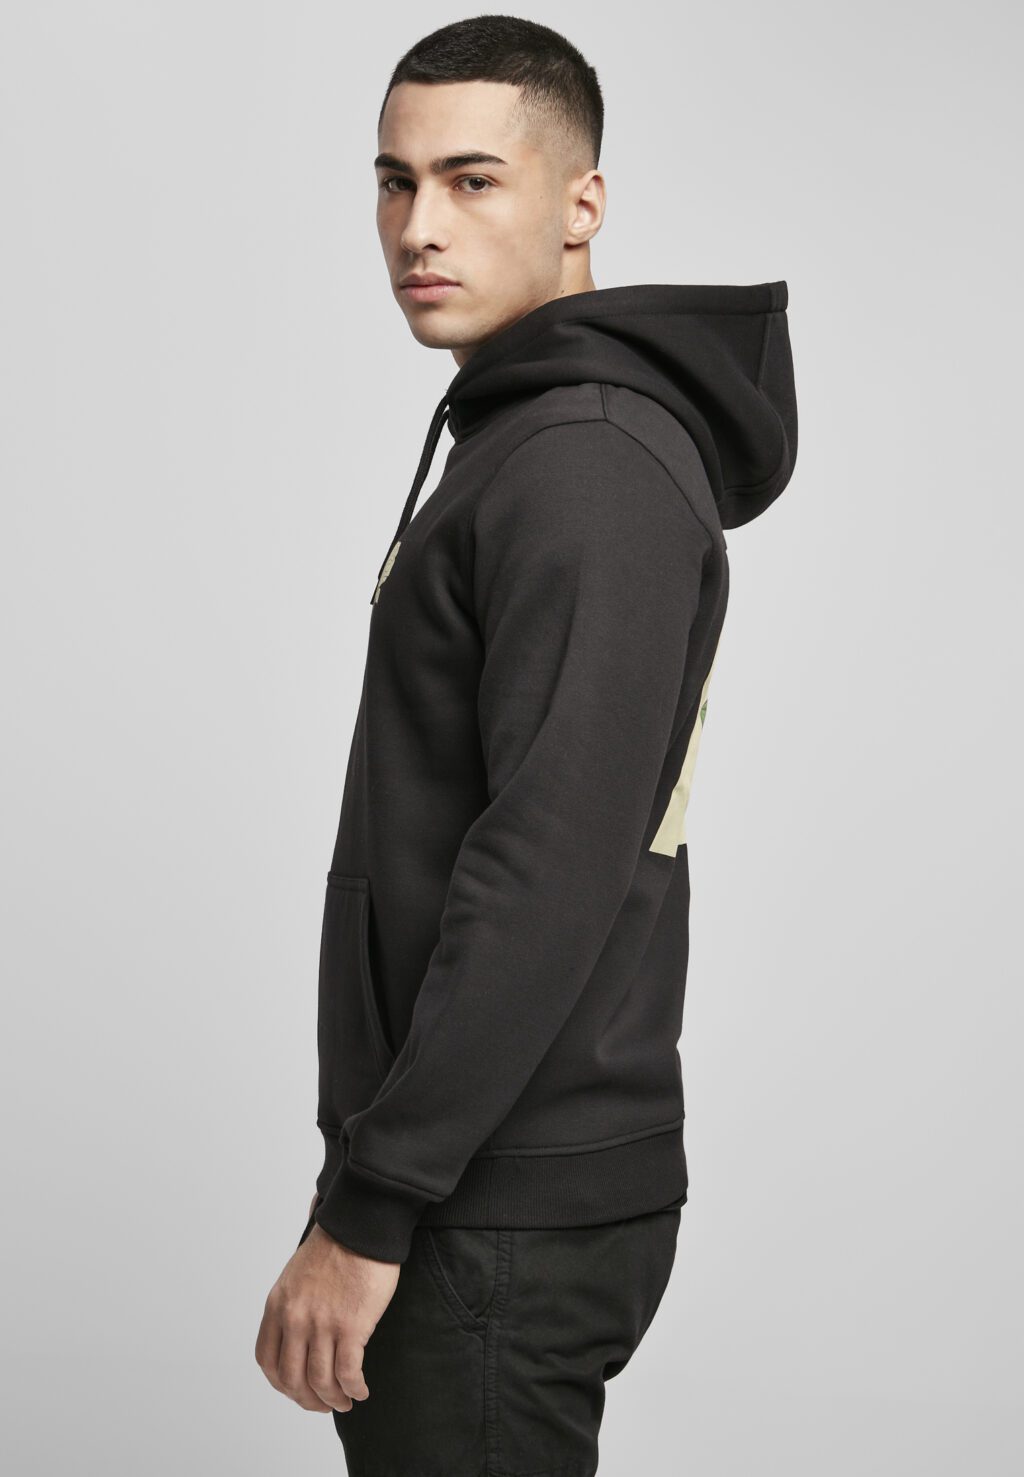 Wasted Youth Hoody black MT1537